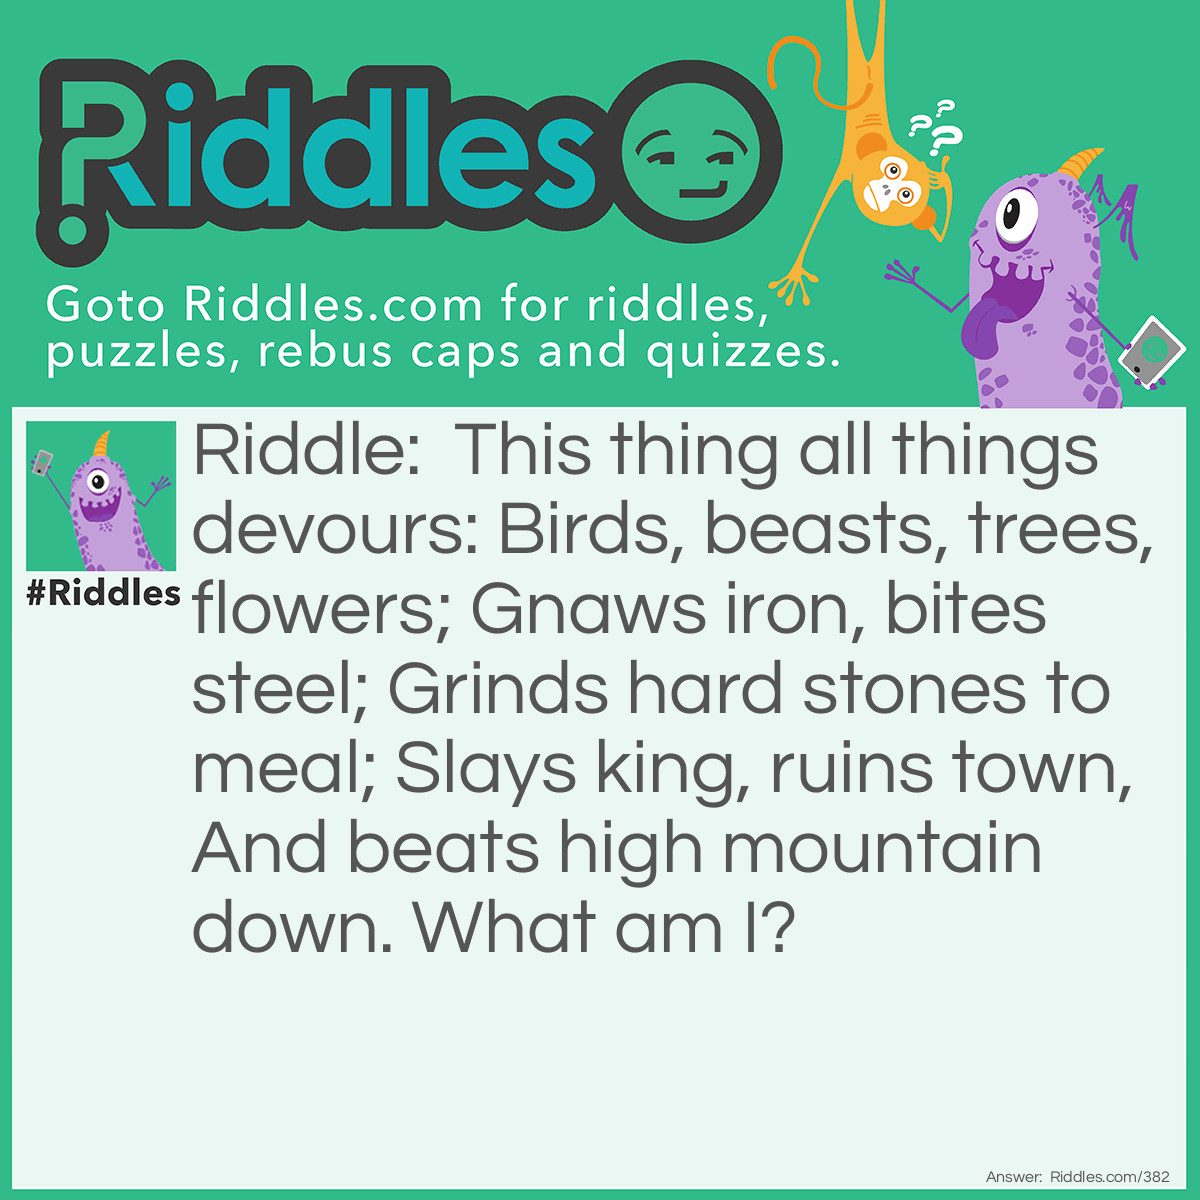 Riddle: This thing all things devours: Birds, beasts, trees, flowers; Gnaws iron, bites steel; Grinds hard stones to meal; Slays king, ruins town, And beats high mountain down. What am I? Answer: Time!